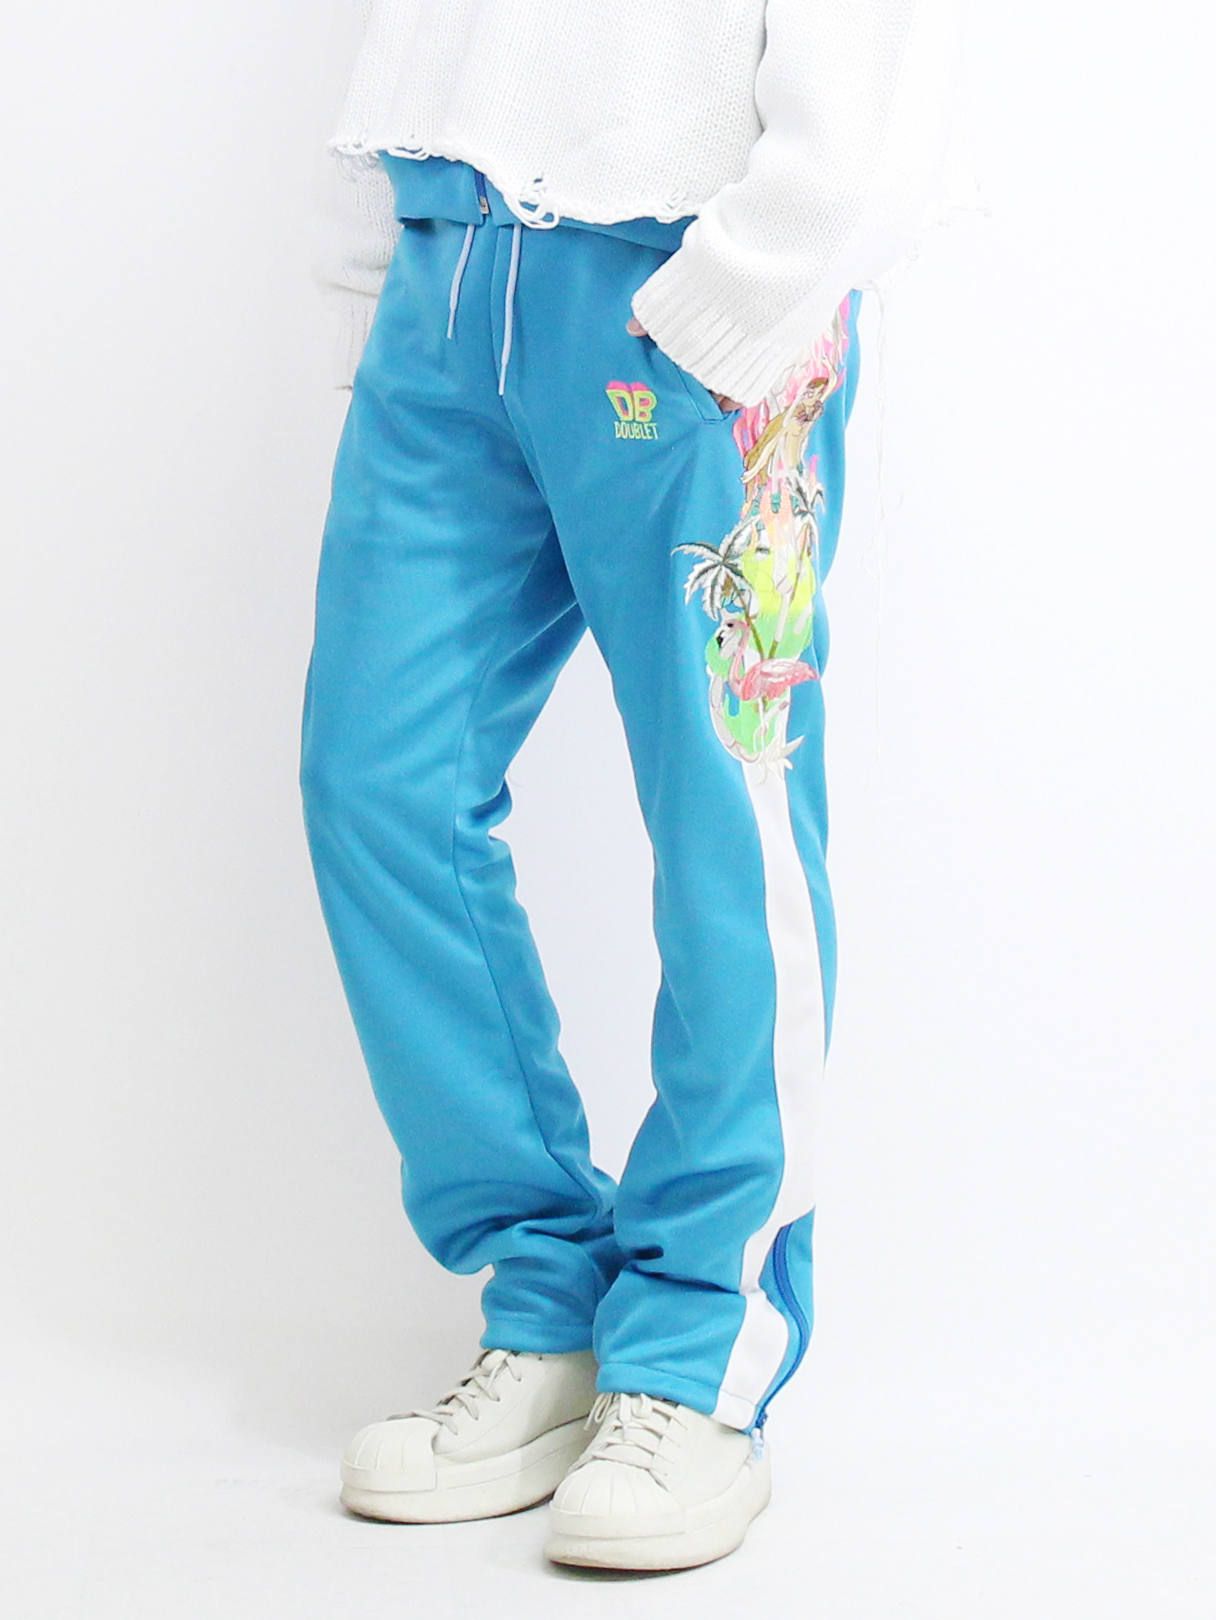 19SSカオス刺繍トラックパンツ - CHAOS EMBROIDERY TRACK PANTS - BLUE - Blue - S